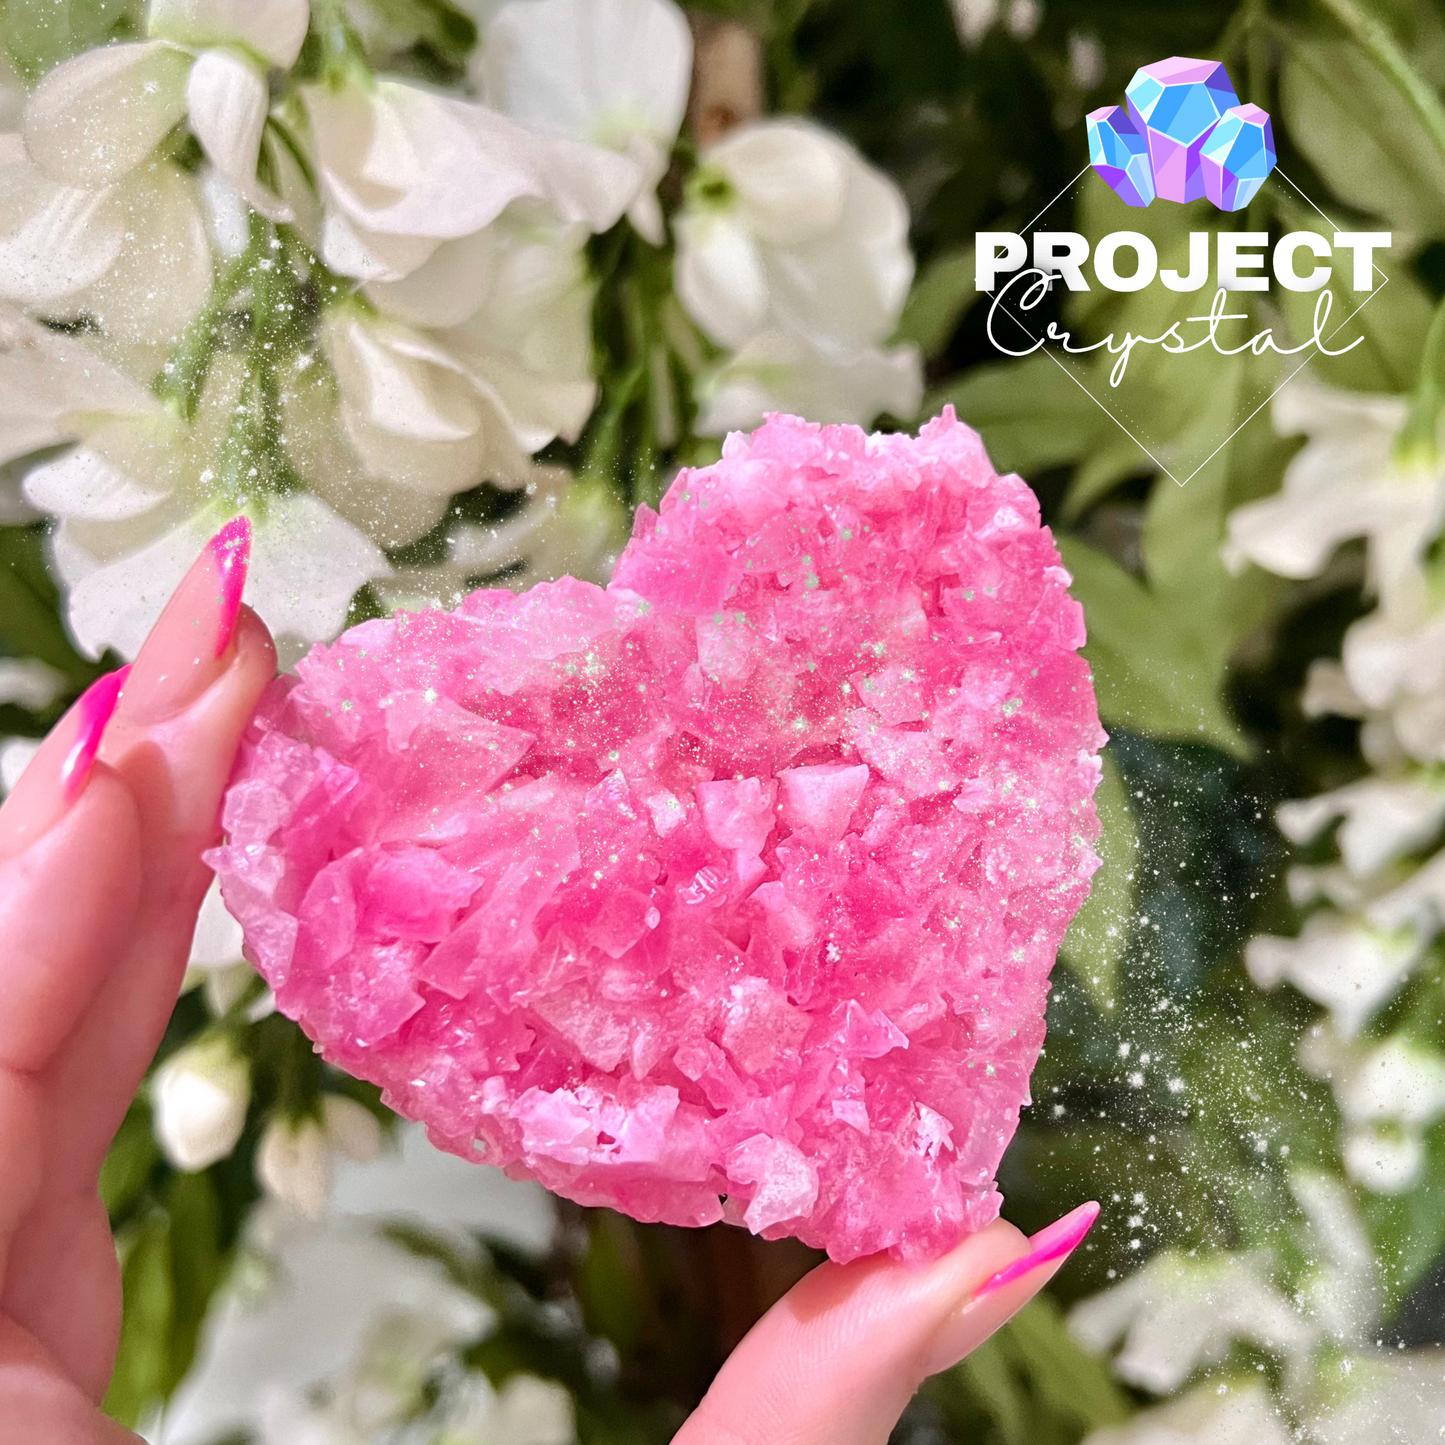 A floral lychee heart shapes cluster made to look like real crystals, vivid pink in colour.